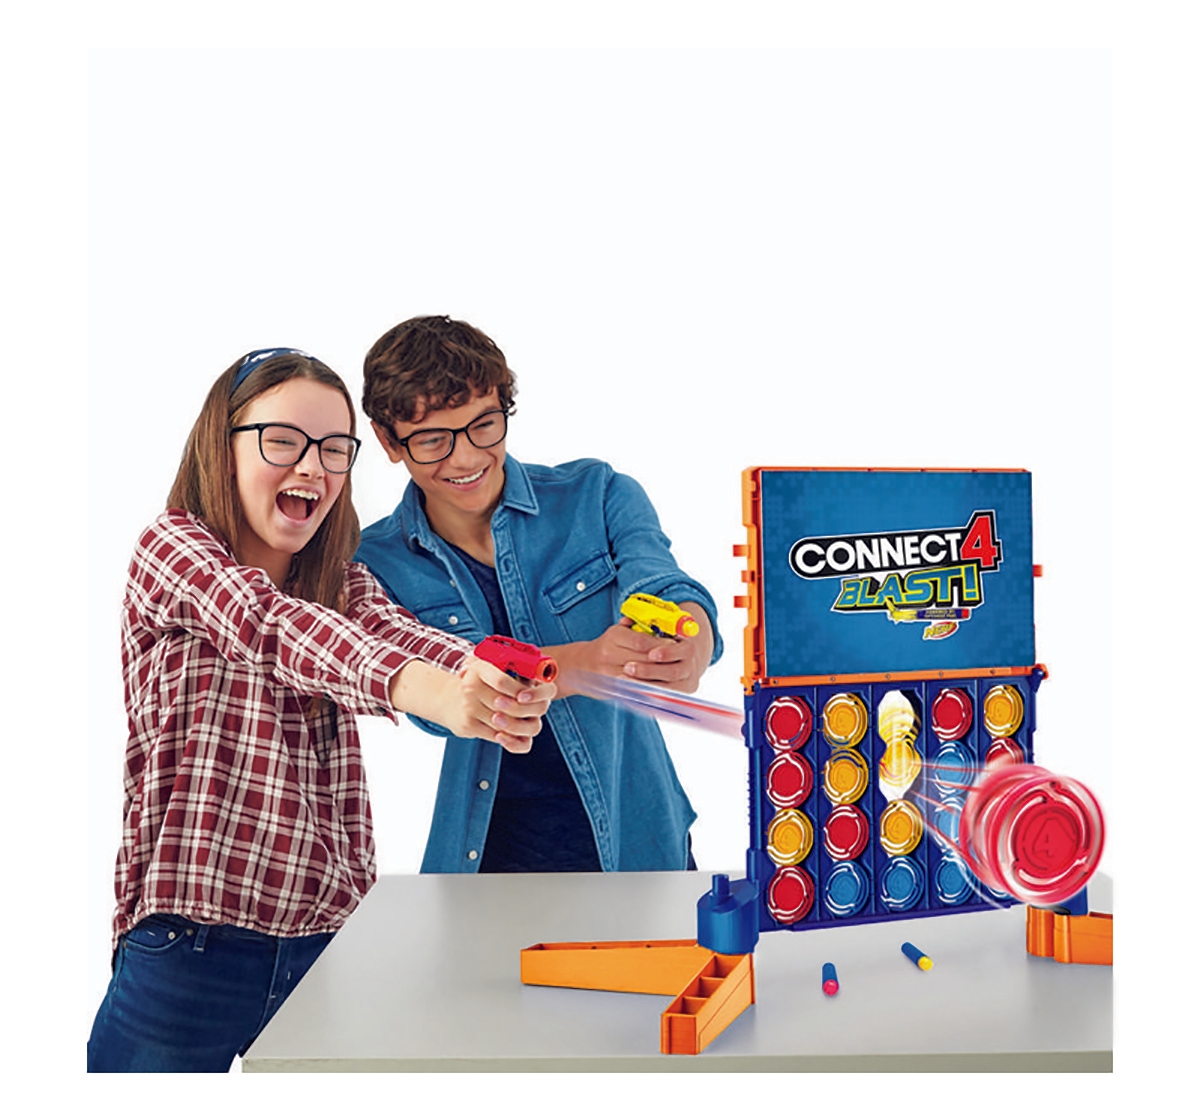 Hasbro Gaming | Hasbro Connect 4 Blast! Game With Nerf Blasters Games for Kids age 8Y+ 4